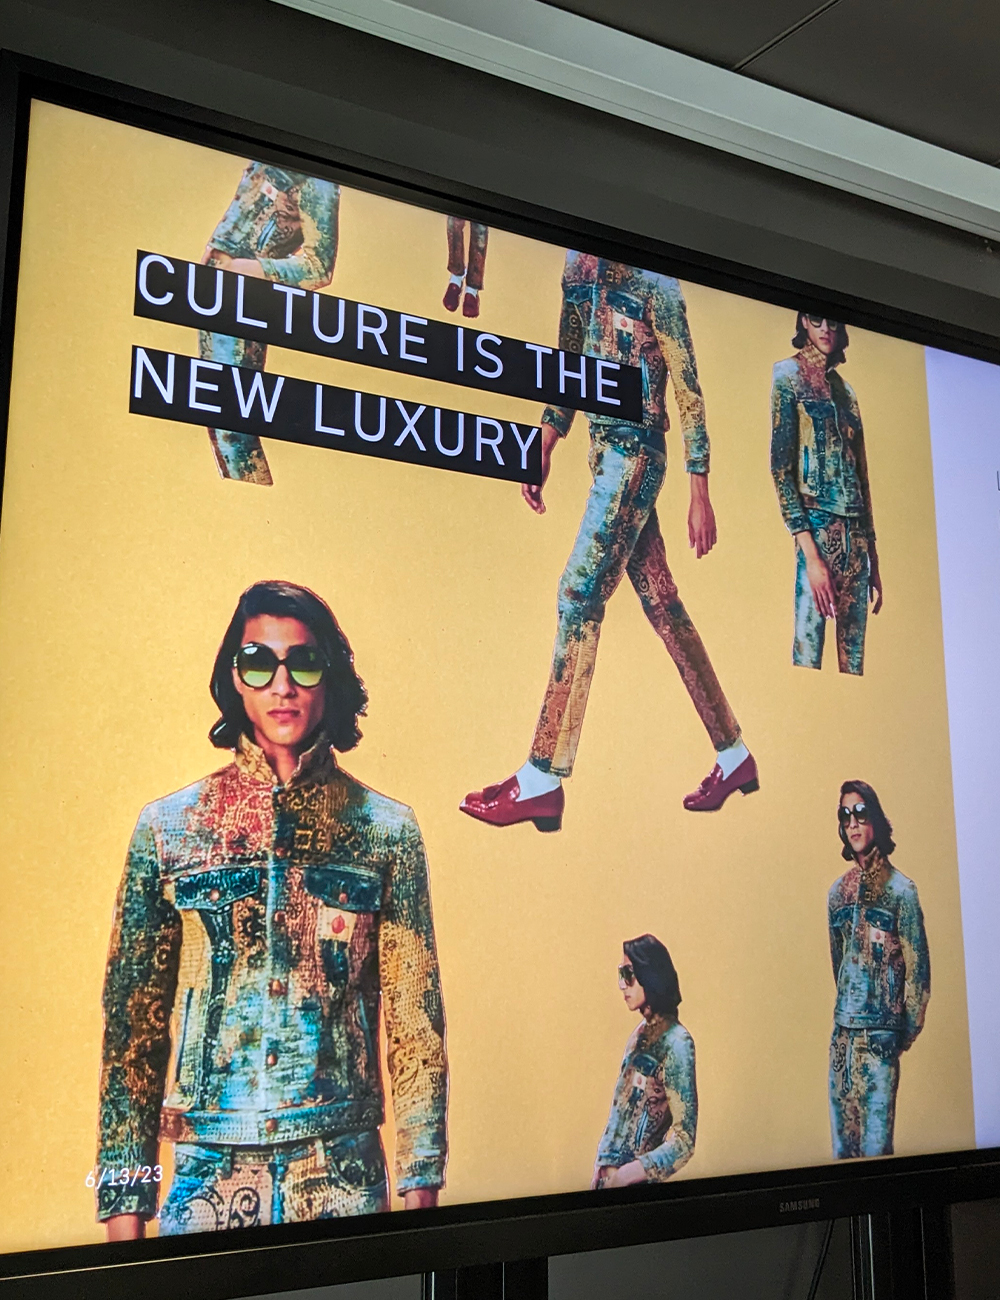 "Fashion is not only about the surface but also about creation, tradition, inclusion, values, and sustainability", said Antía Enríquez Martínez, a Barreira student. Photo courtesy of the author